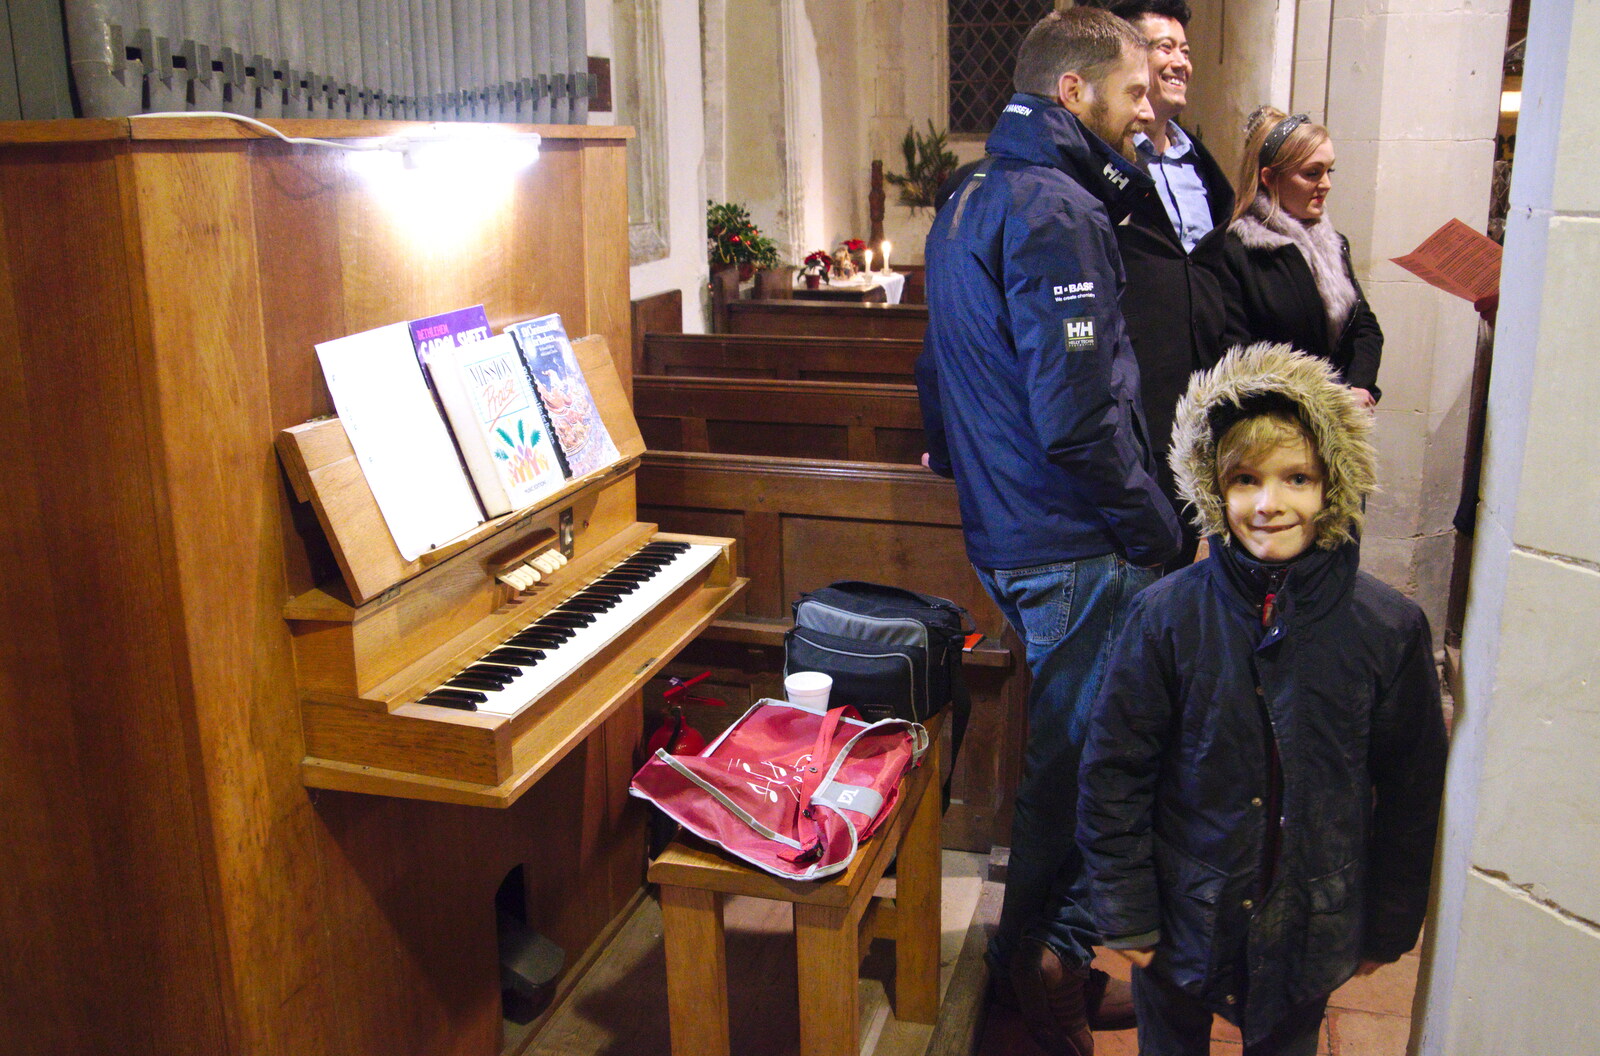 Harry messes around near the organ from The GSB at Thornham Magna and Yaxley Cherry Tree, Suffolk - 15th December 2019